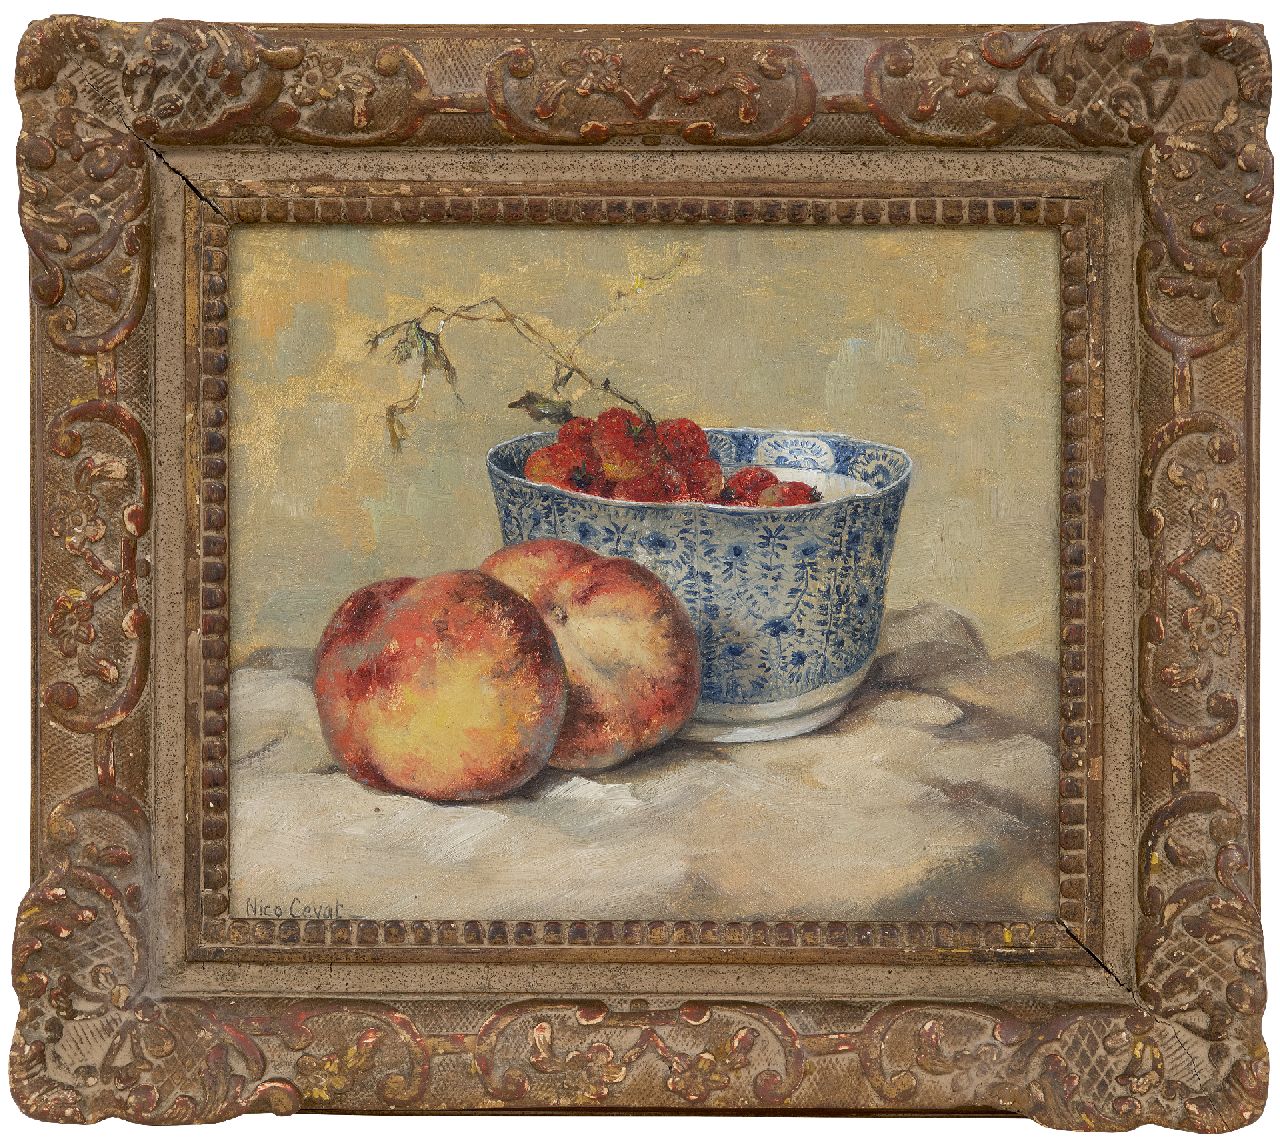 Cevat N.F.H.  | Nicolas Friedrich Heinrich 'Nico' Cevat | Paintings offered for sale | Still life with peaches and strawberries, oil on panel 23.4 x 28.0 cm, signed l.l.